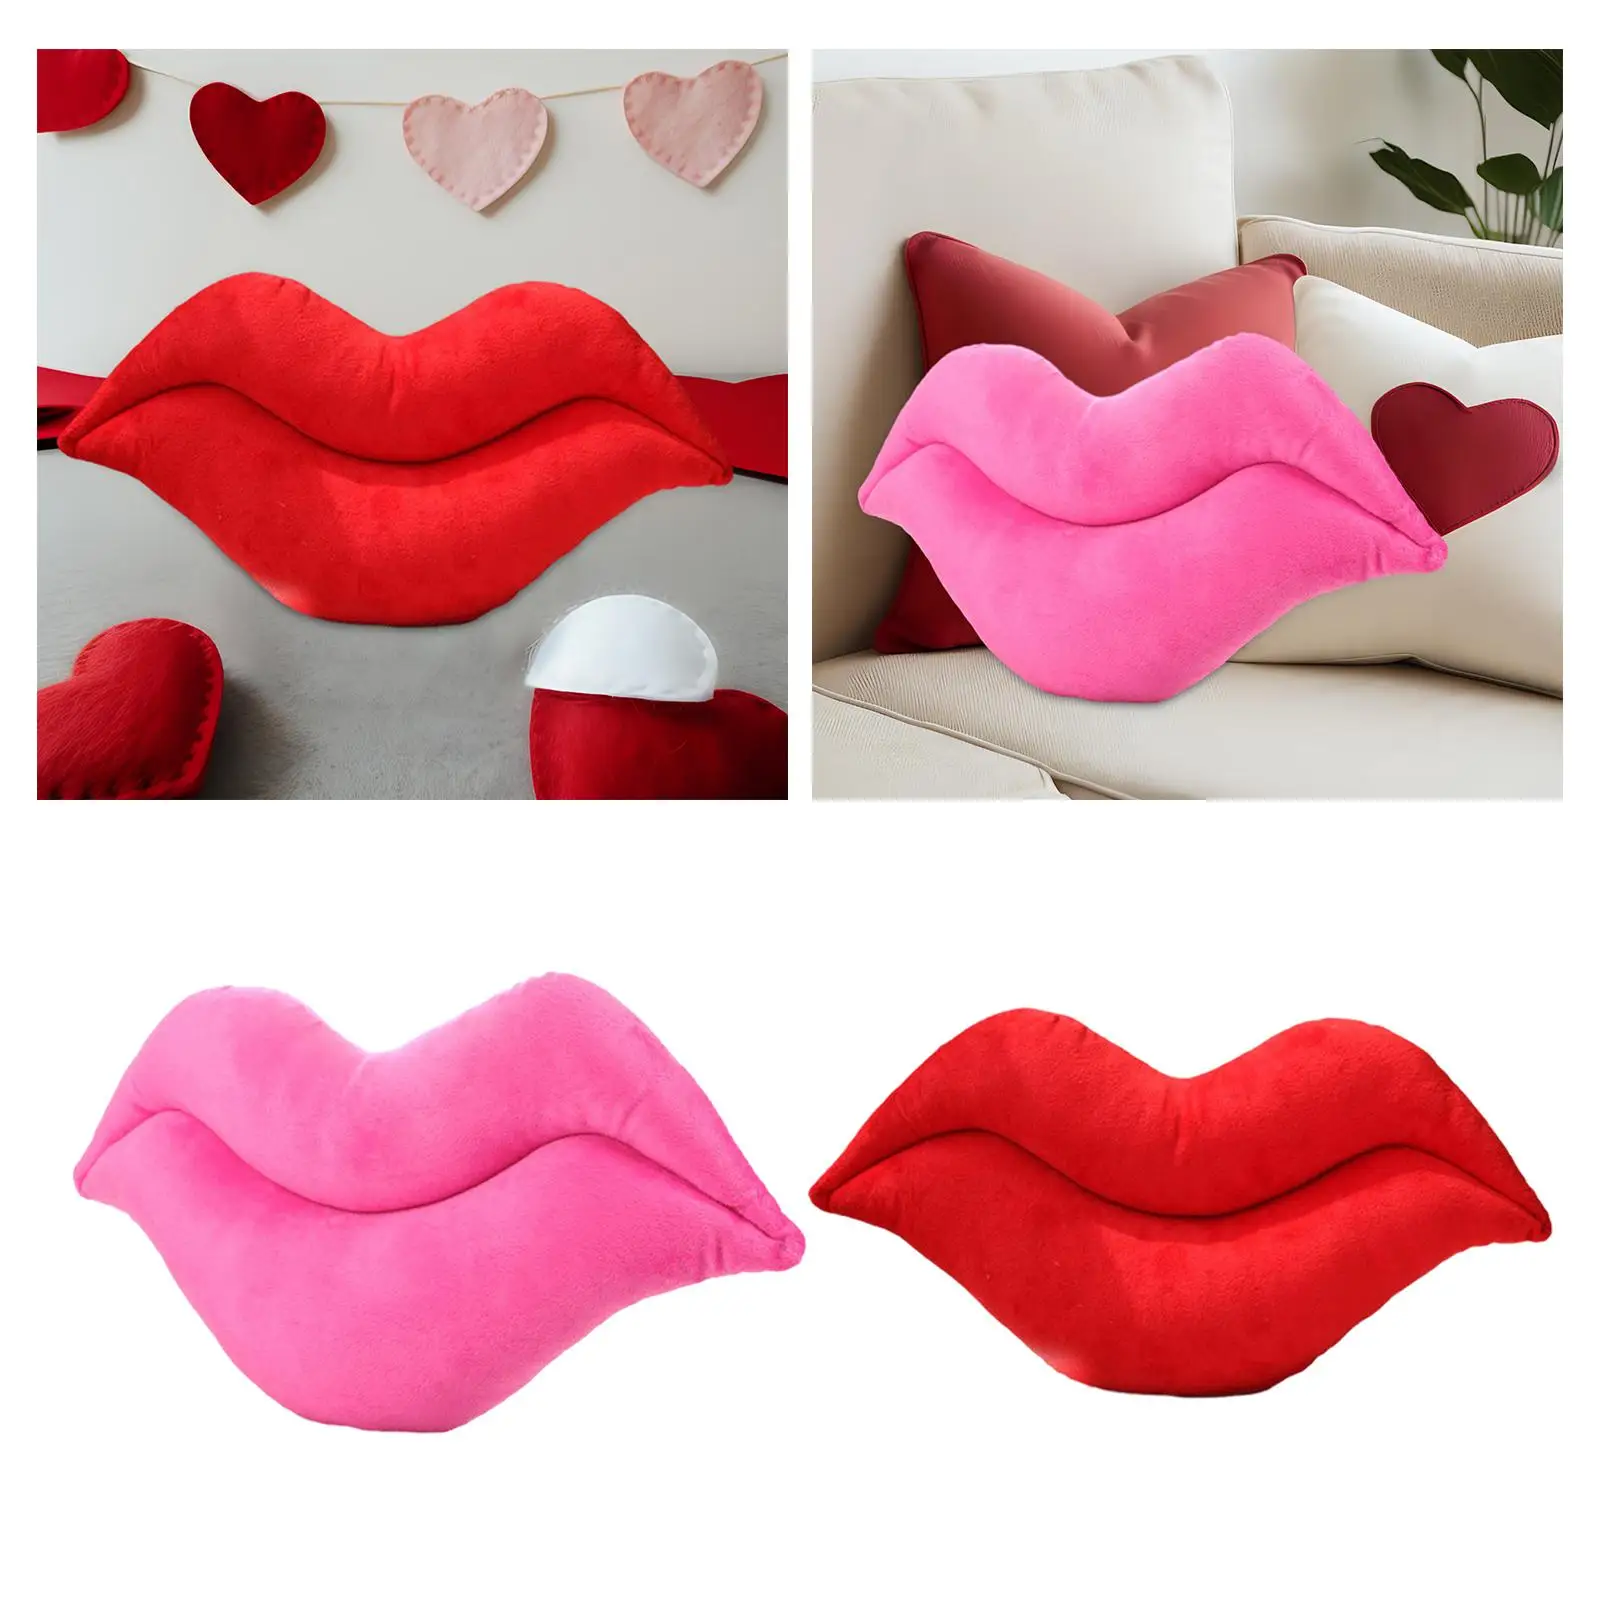 Lip Shaped Throw Pillow Cute Lightweight Valentines Day Decor Decorative Pillow for Car Seats Hotel Couch Bench Family Members